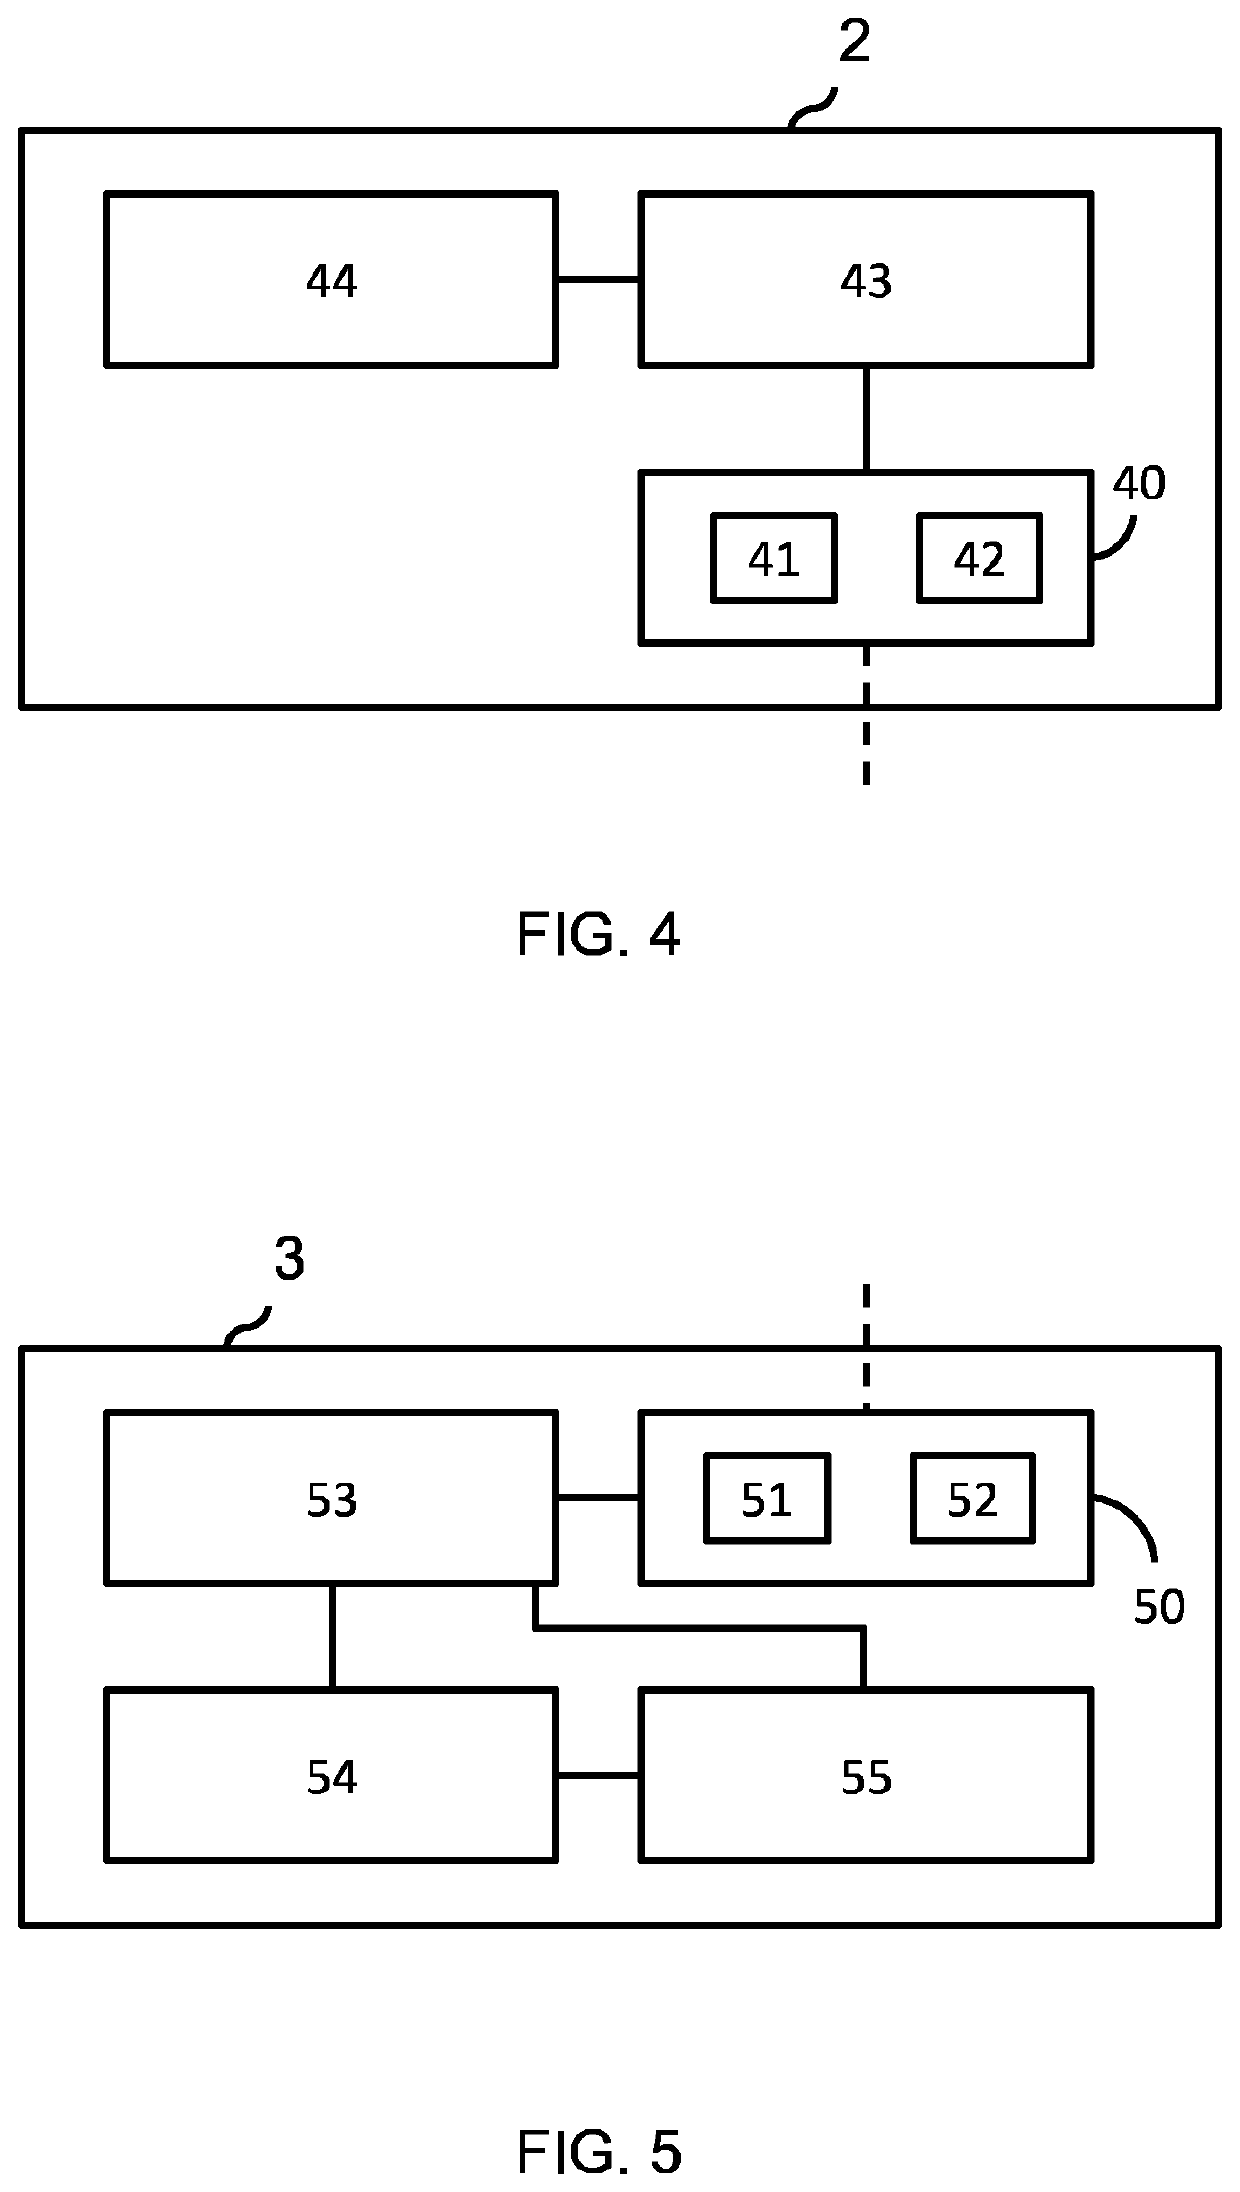 Controlling end nodes of a low-power wide area network